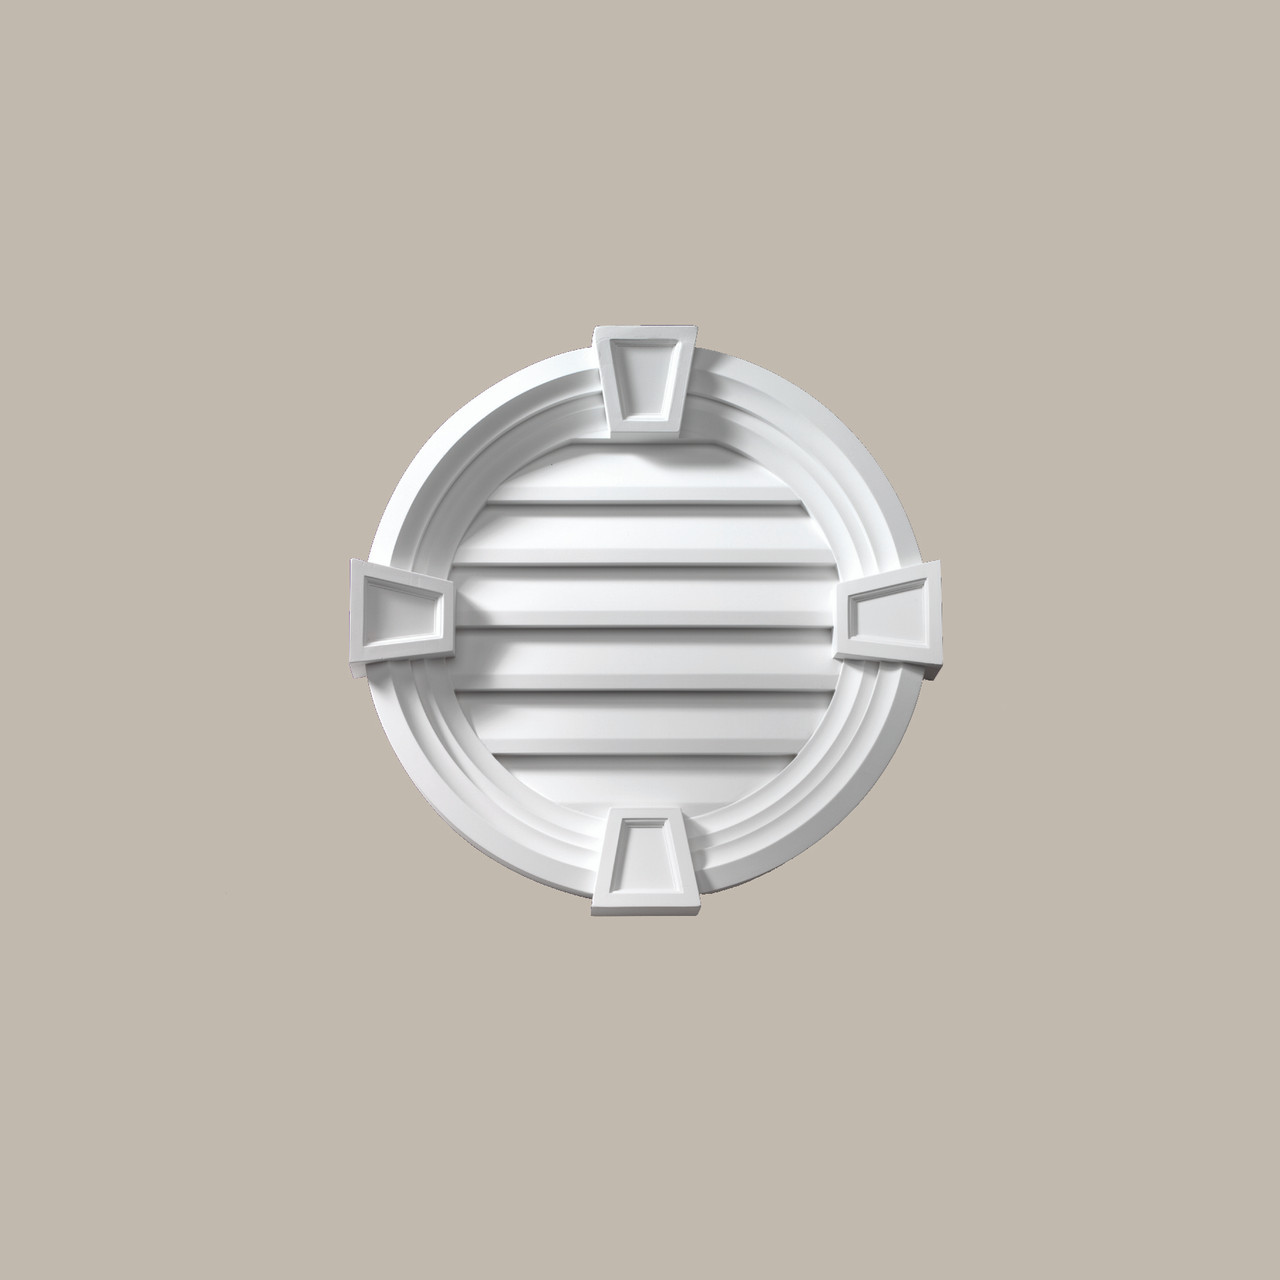 FRLV40MTK Functional Standard Keystone Round Louver Vent with Decorative Trim - 40" Diameter